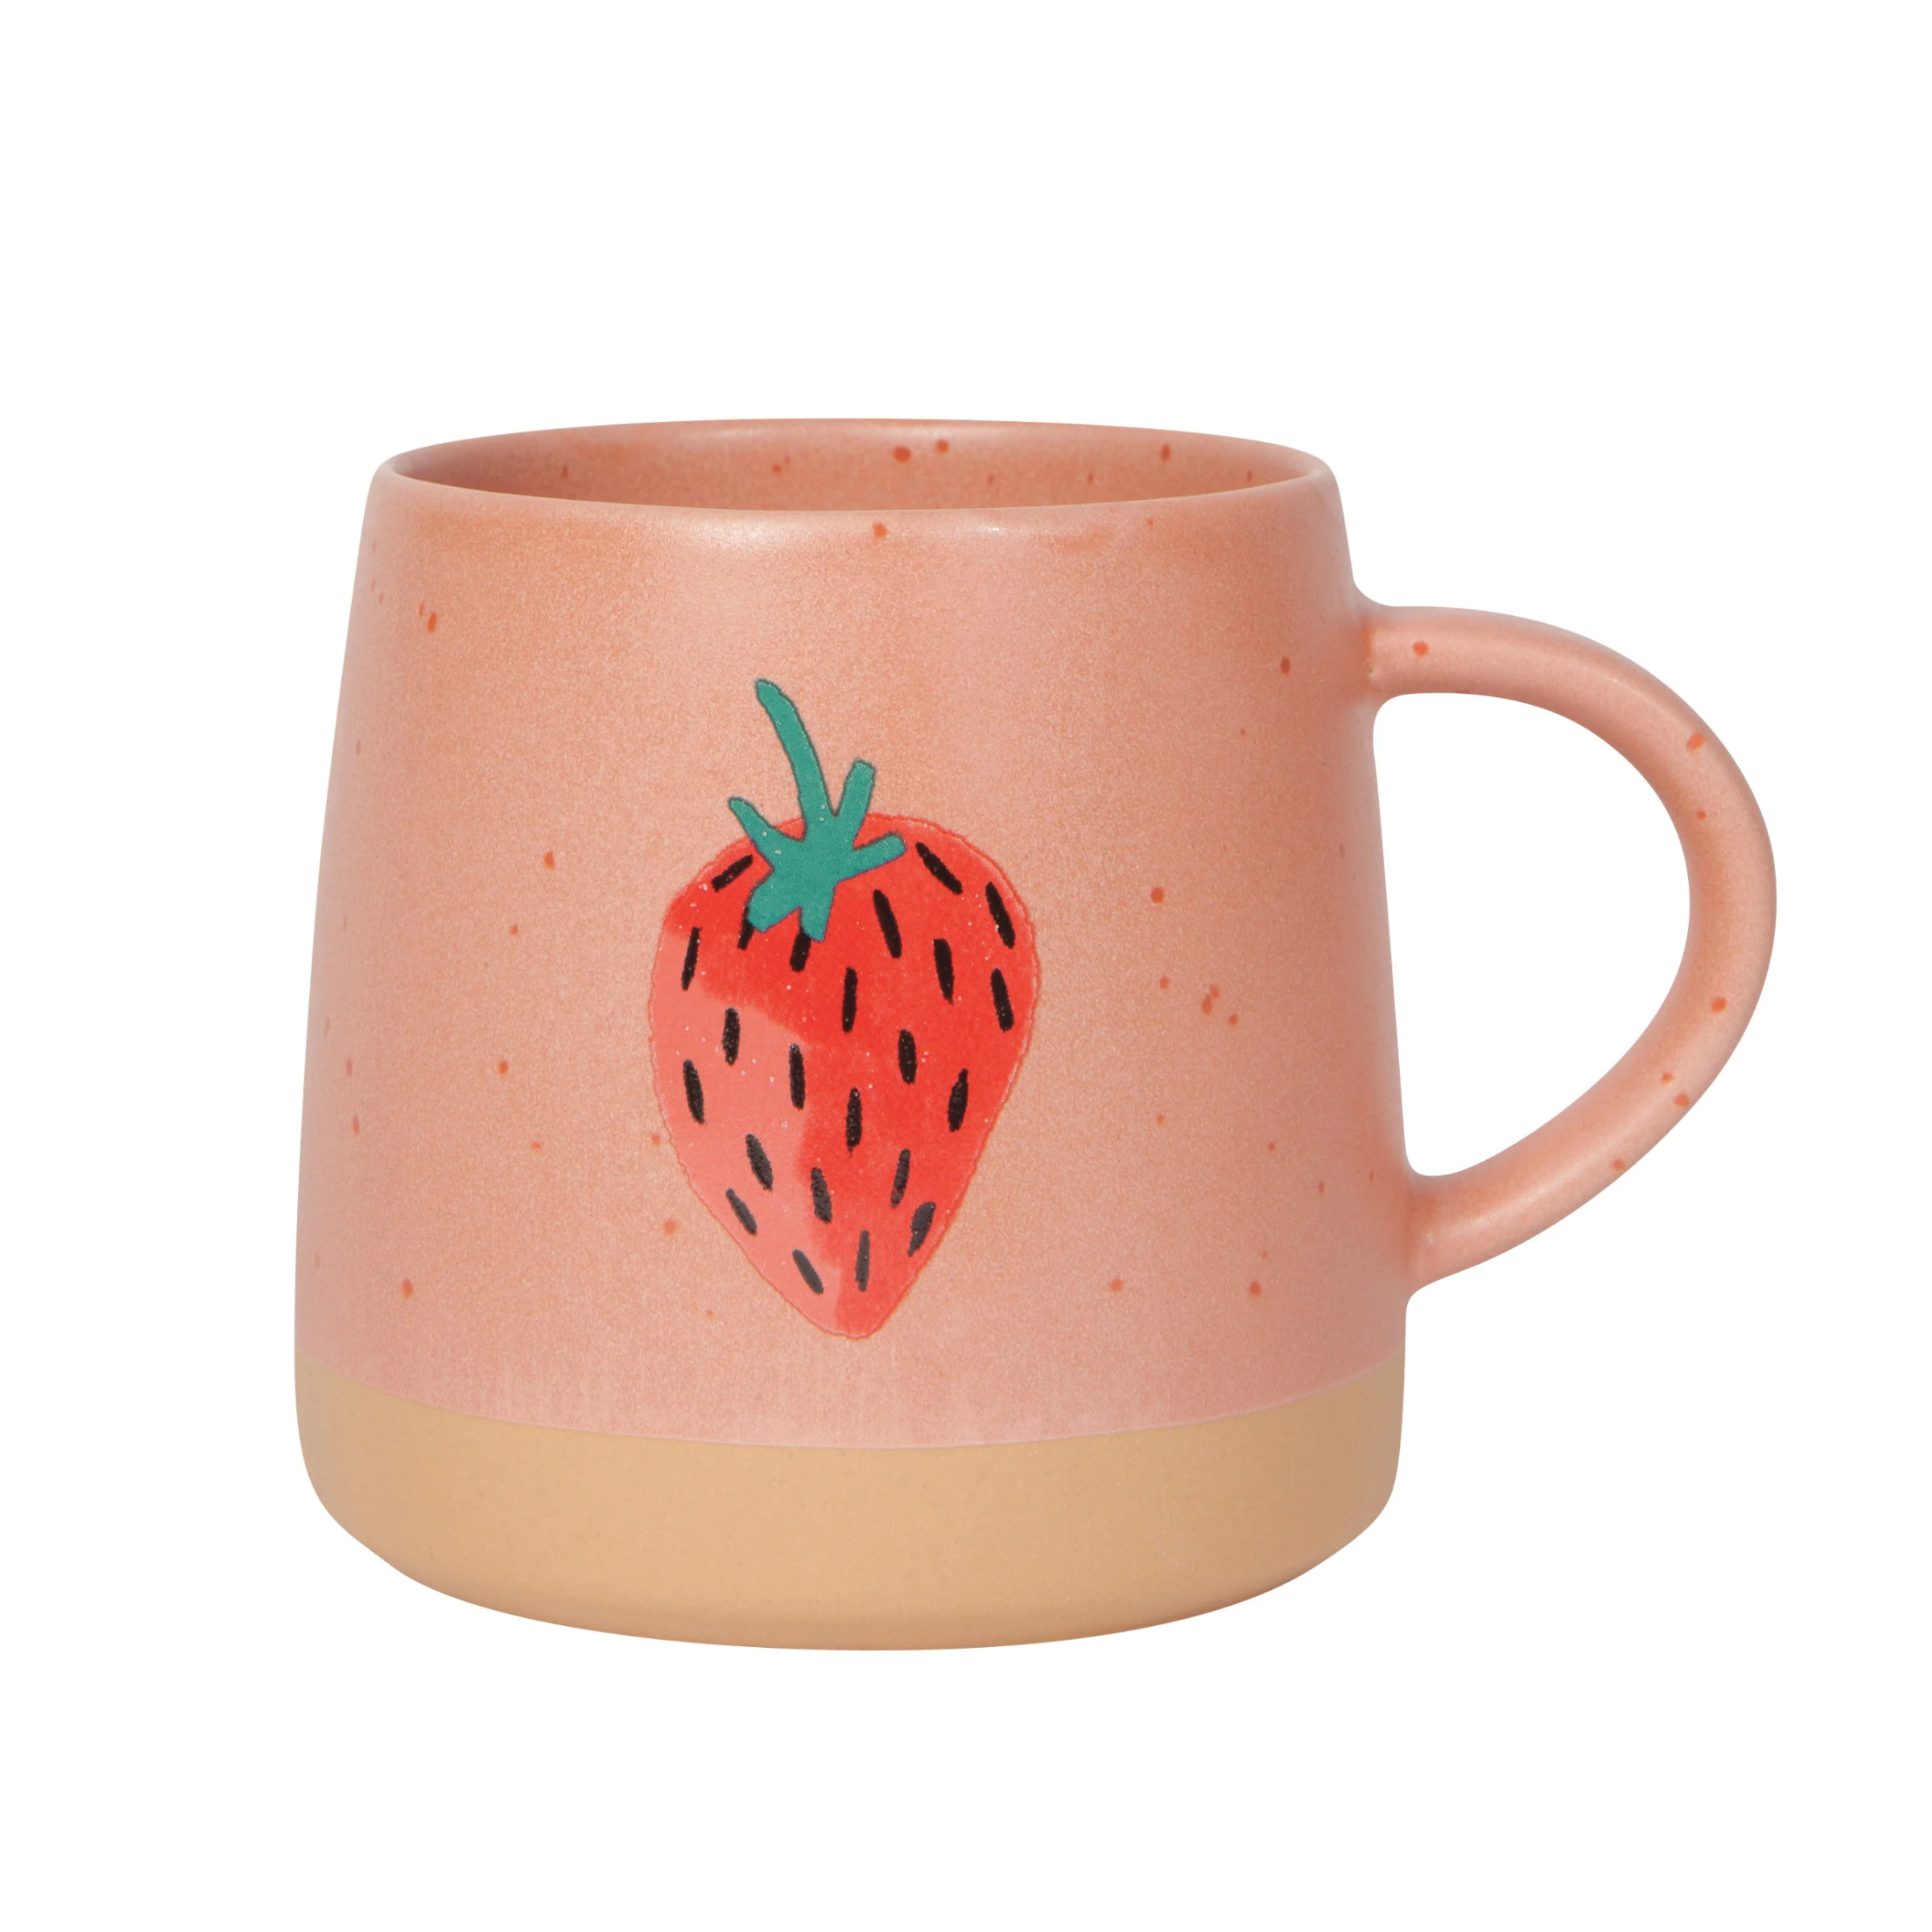 pink ceramic mug with red strawberry picture printed on made by danica